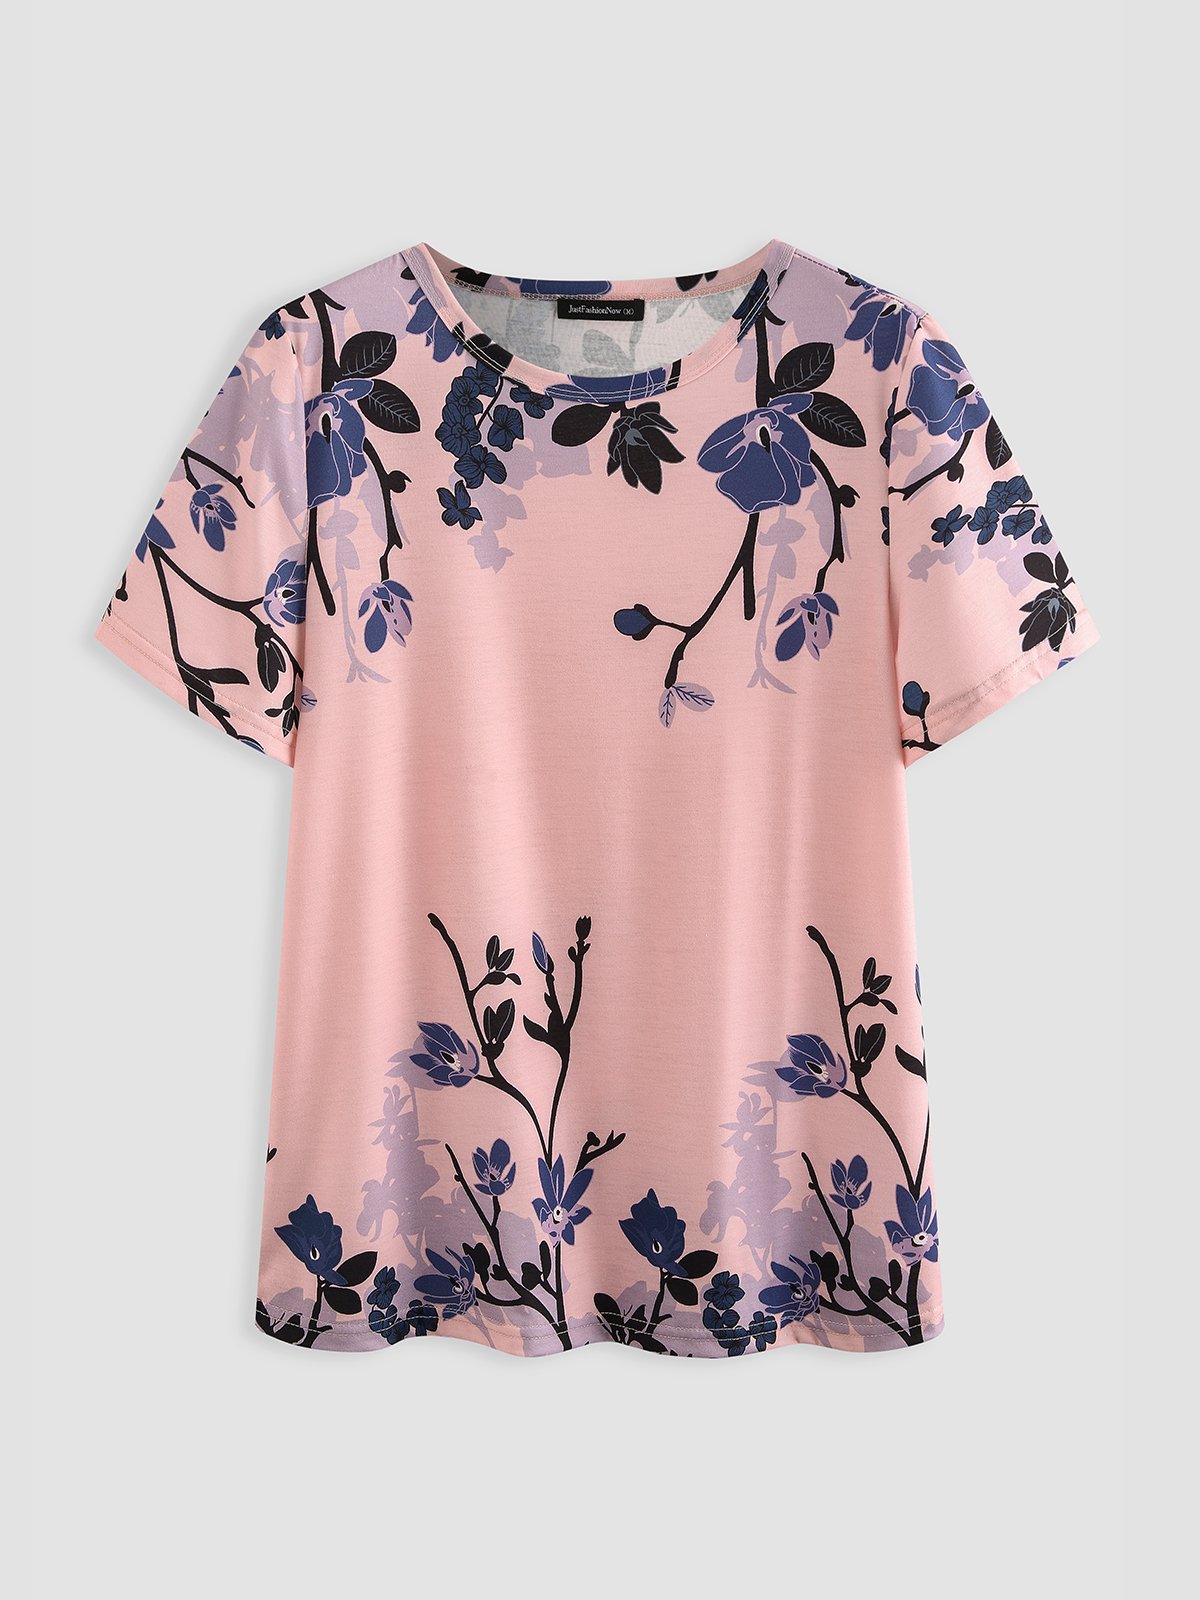 JFN Crew Neck Floral Casual T-Blouse/Tee